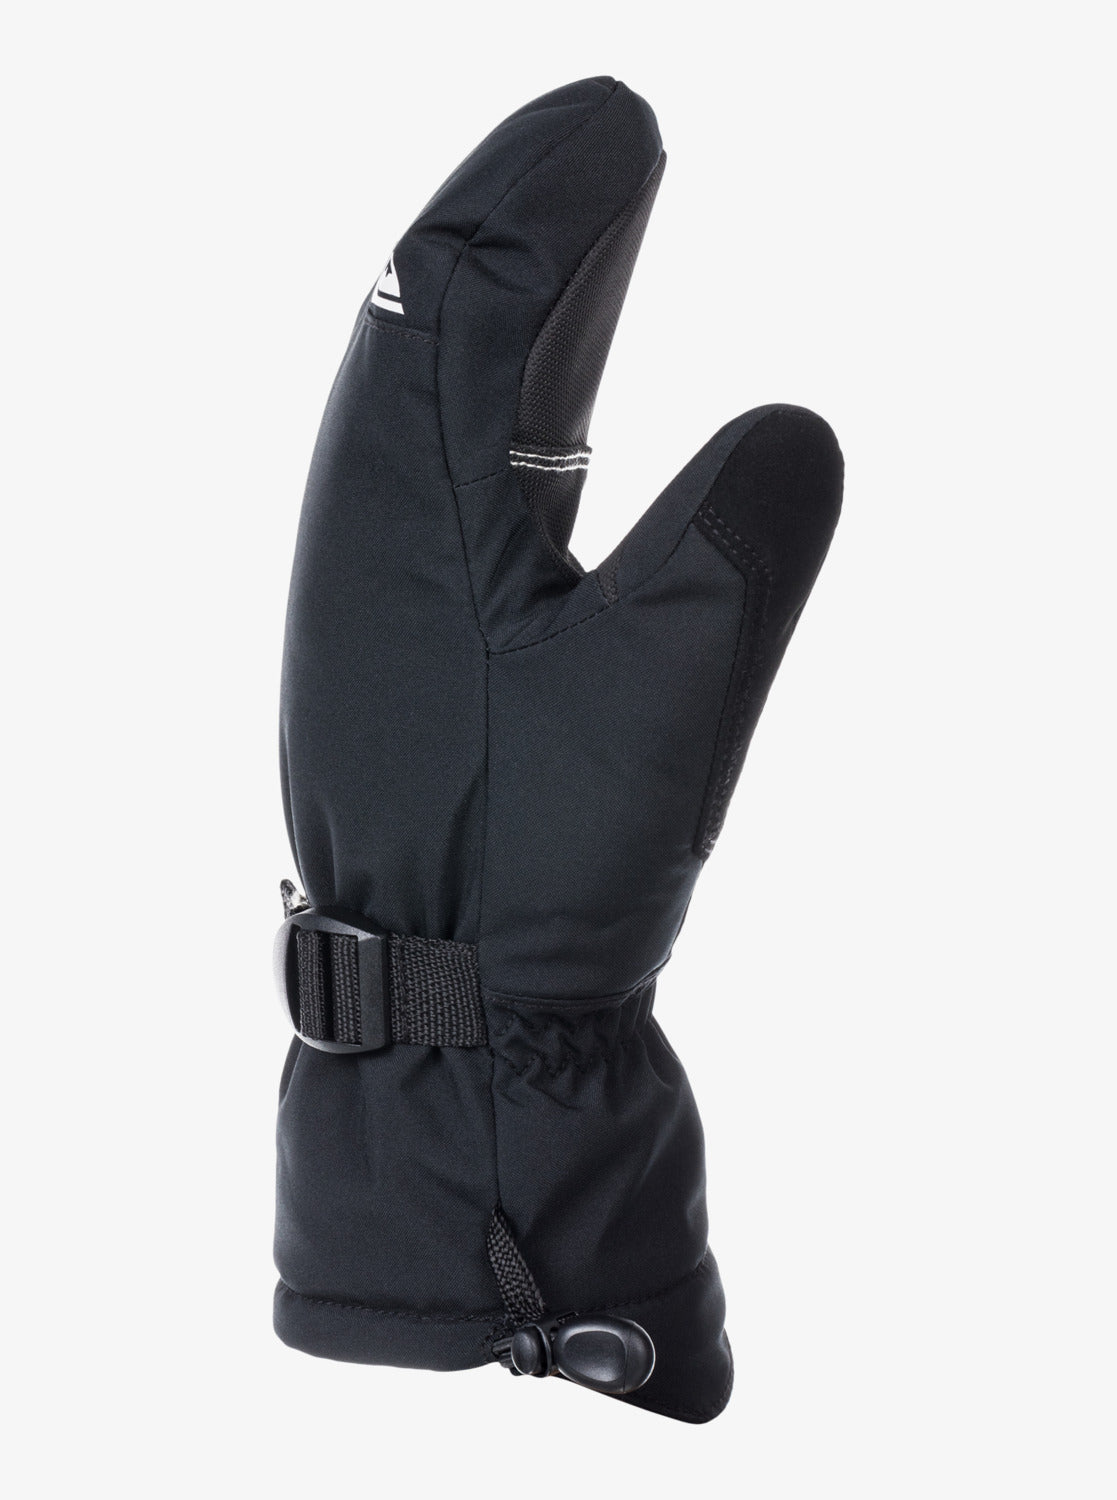 Quiksilver Mission Youth Mitts - 88 Gear